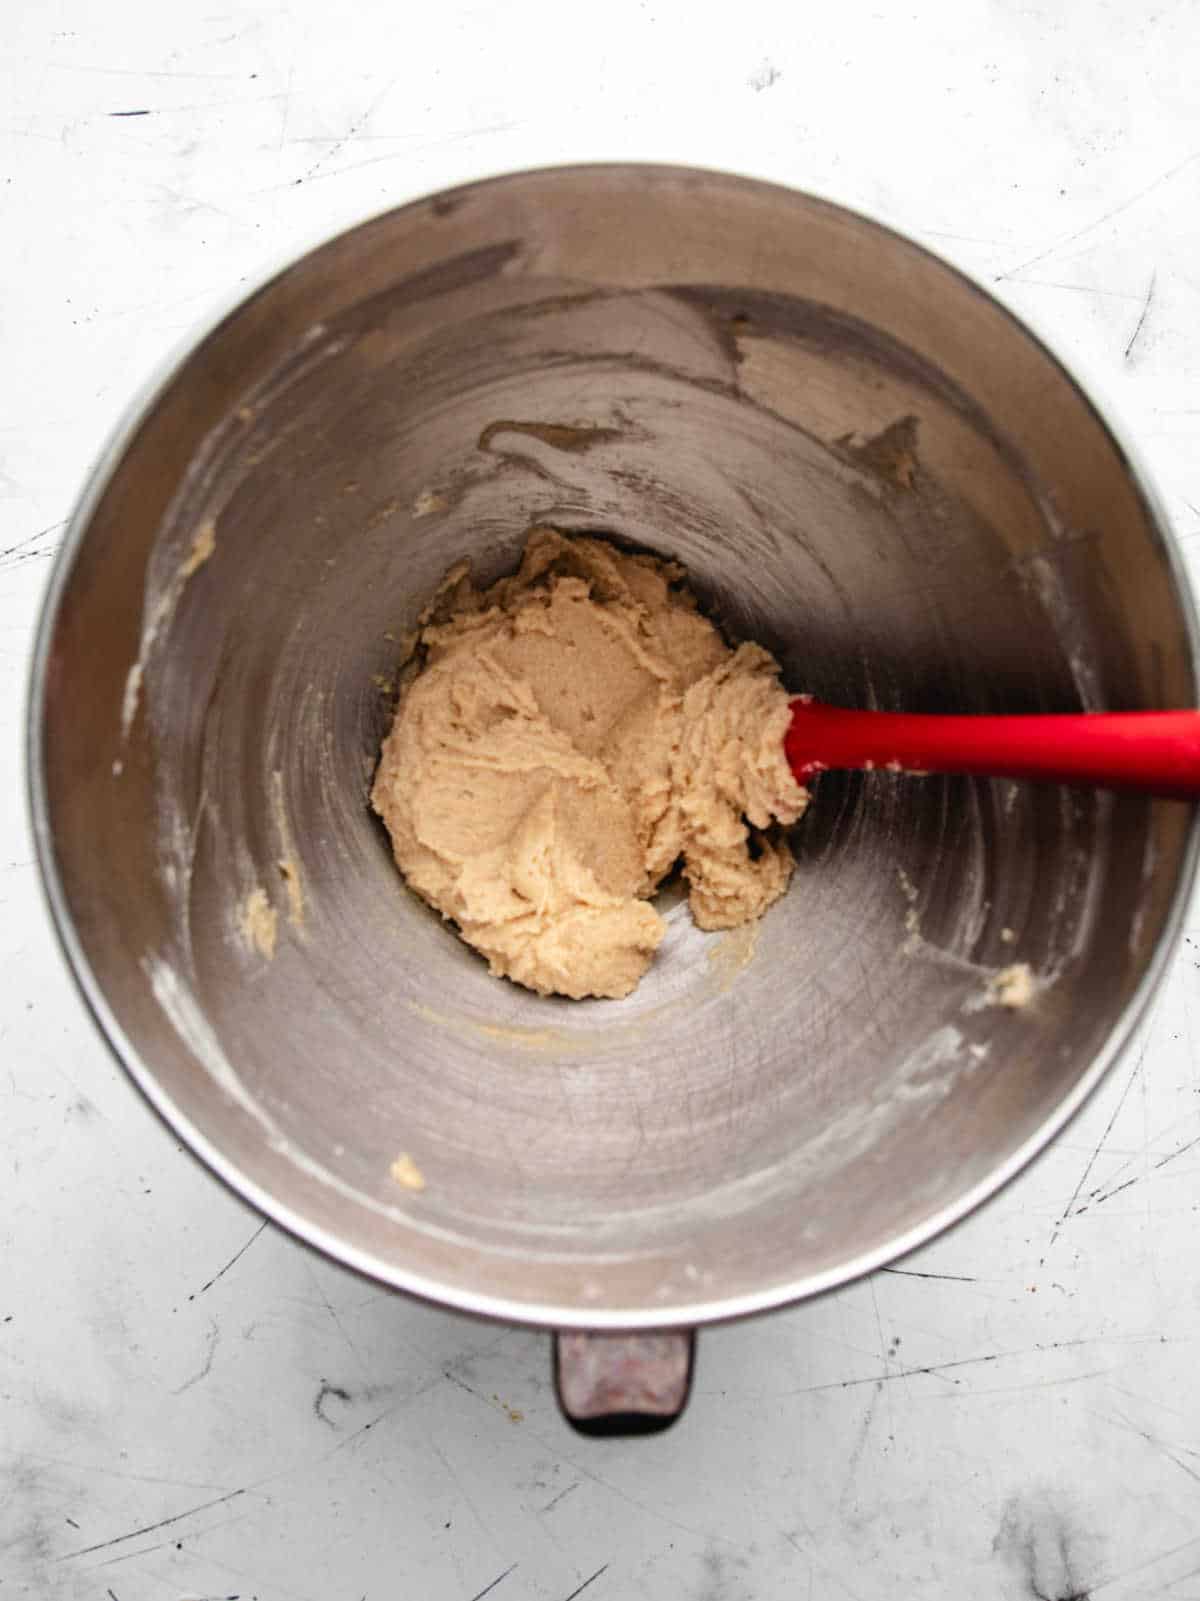 Creamed butter and sugar mixture in a silver mixing bowl. 